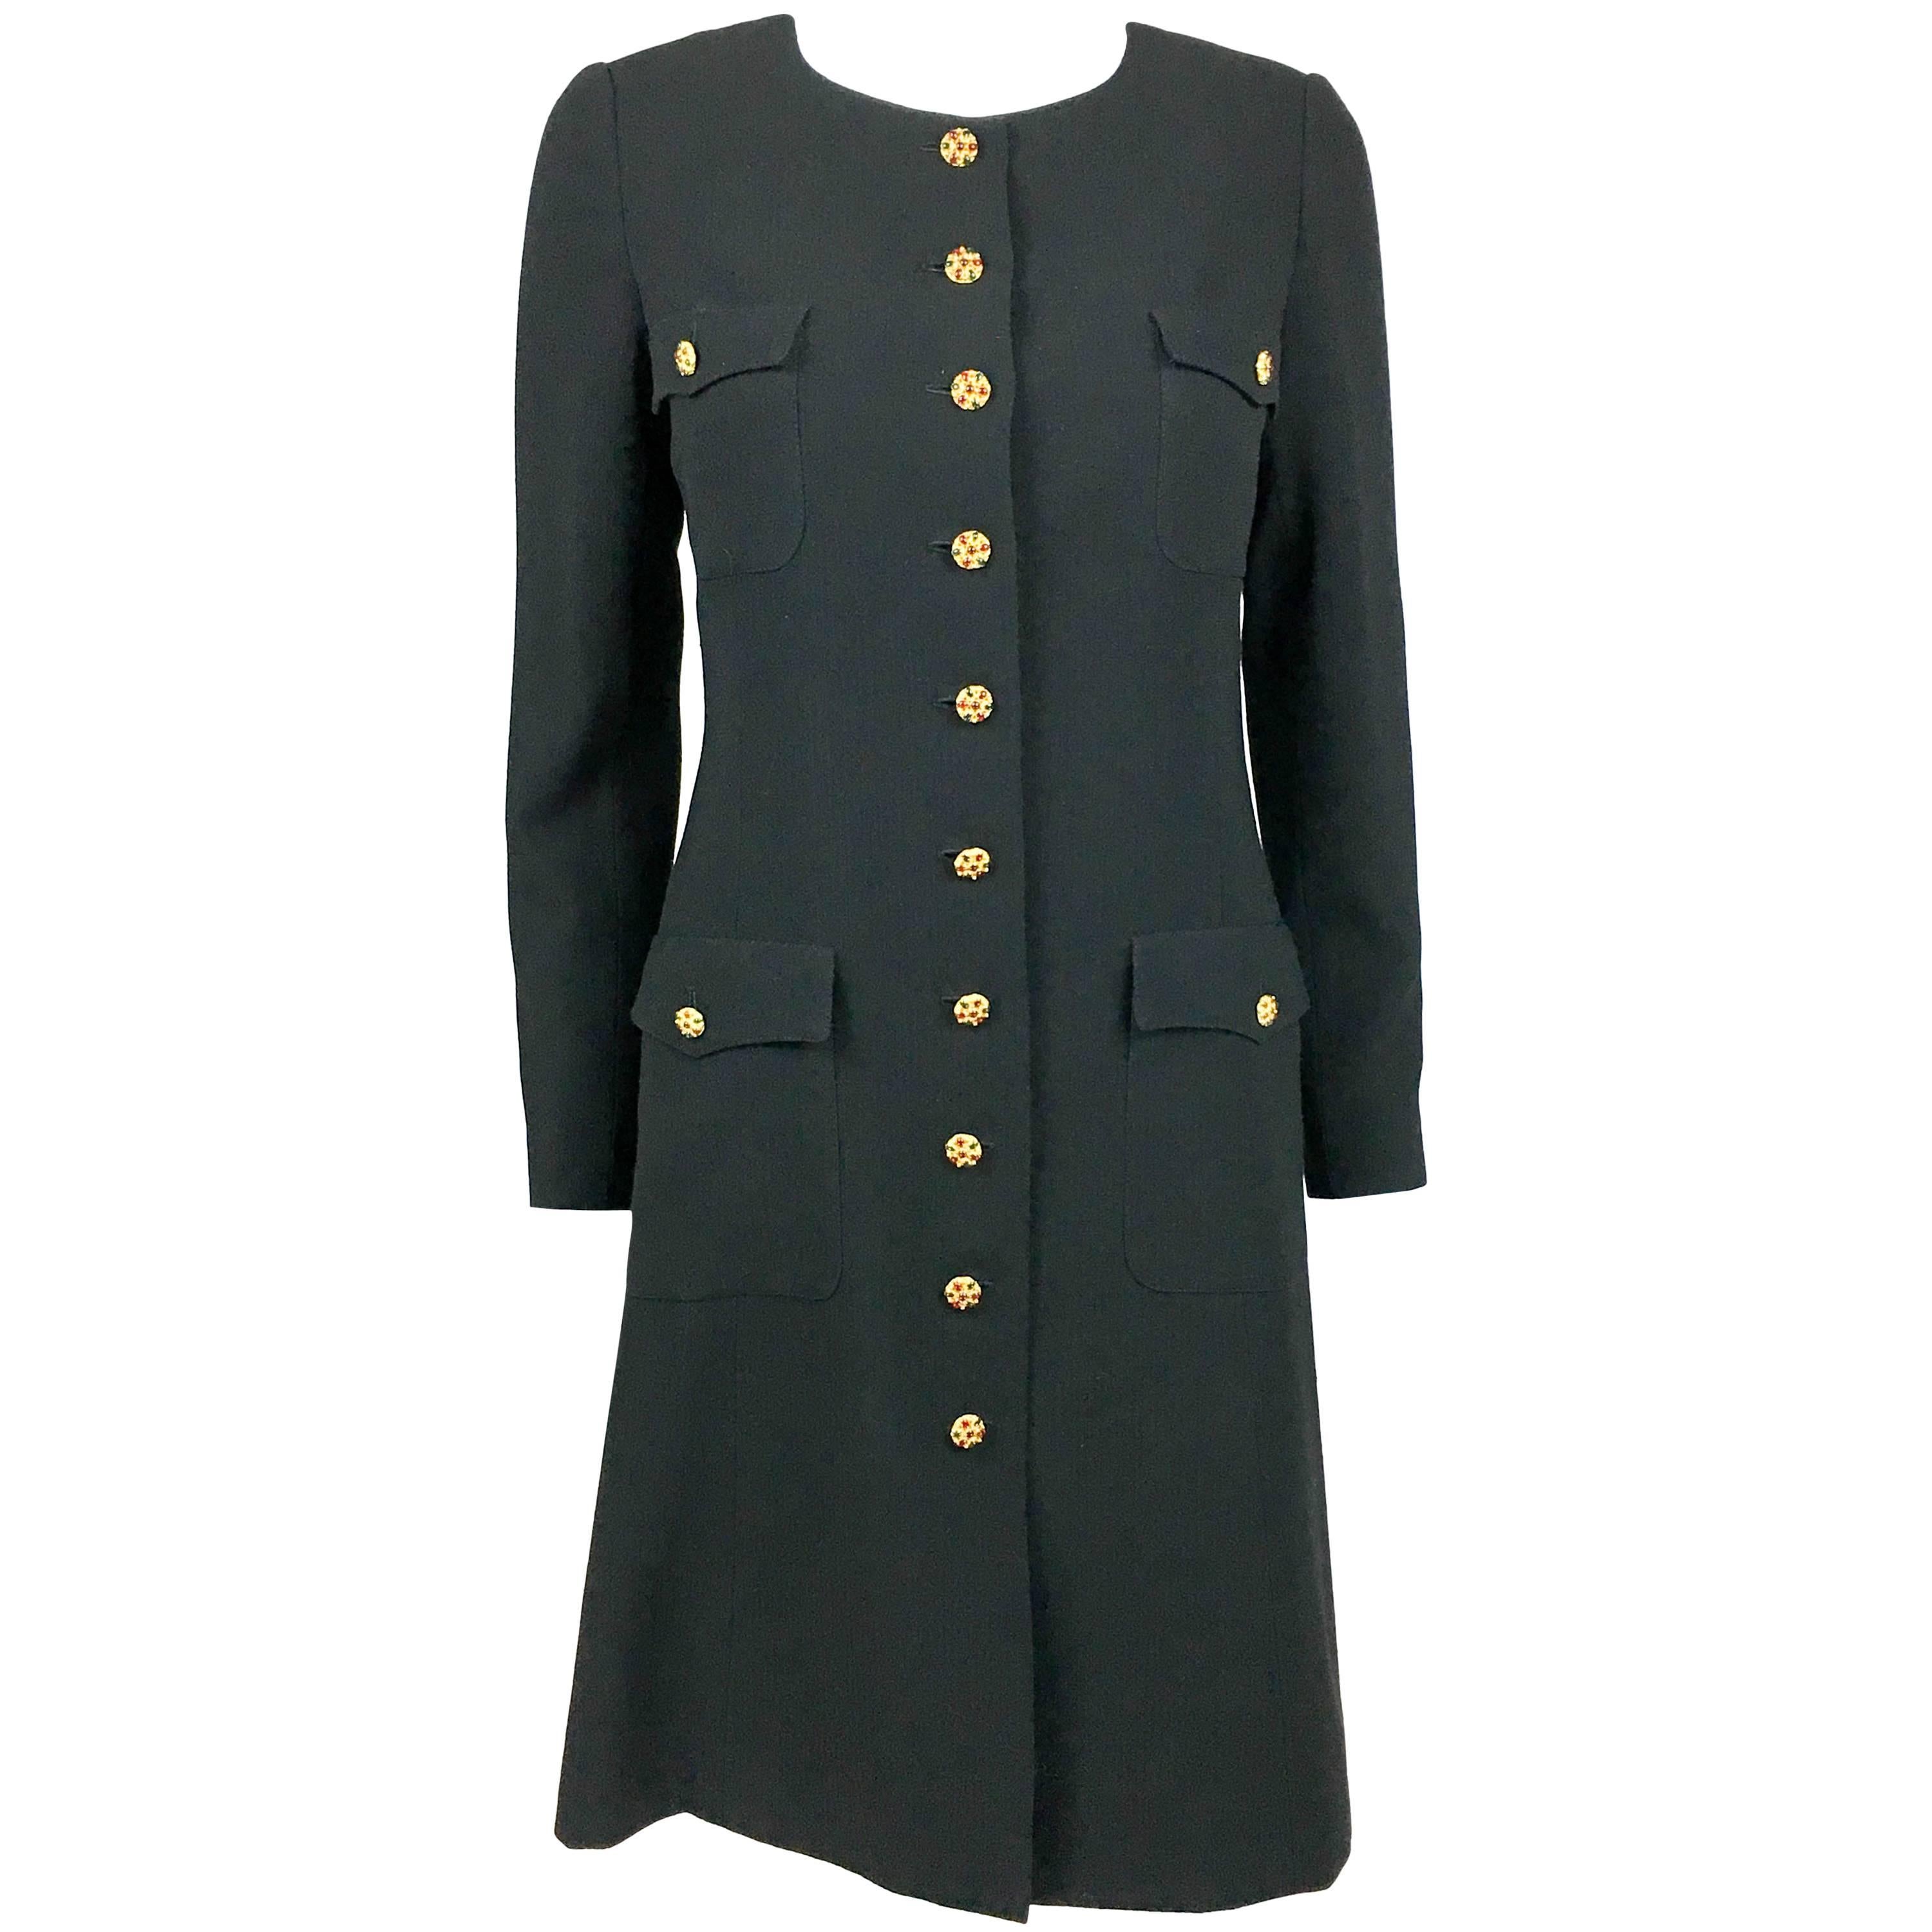 1996 Chanel Runway Look Black Wool Coat / Dress With Baroque-Style Buttons